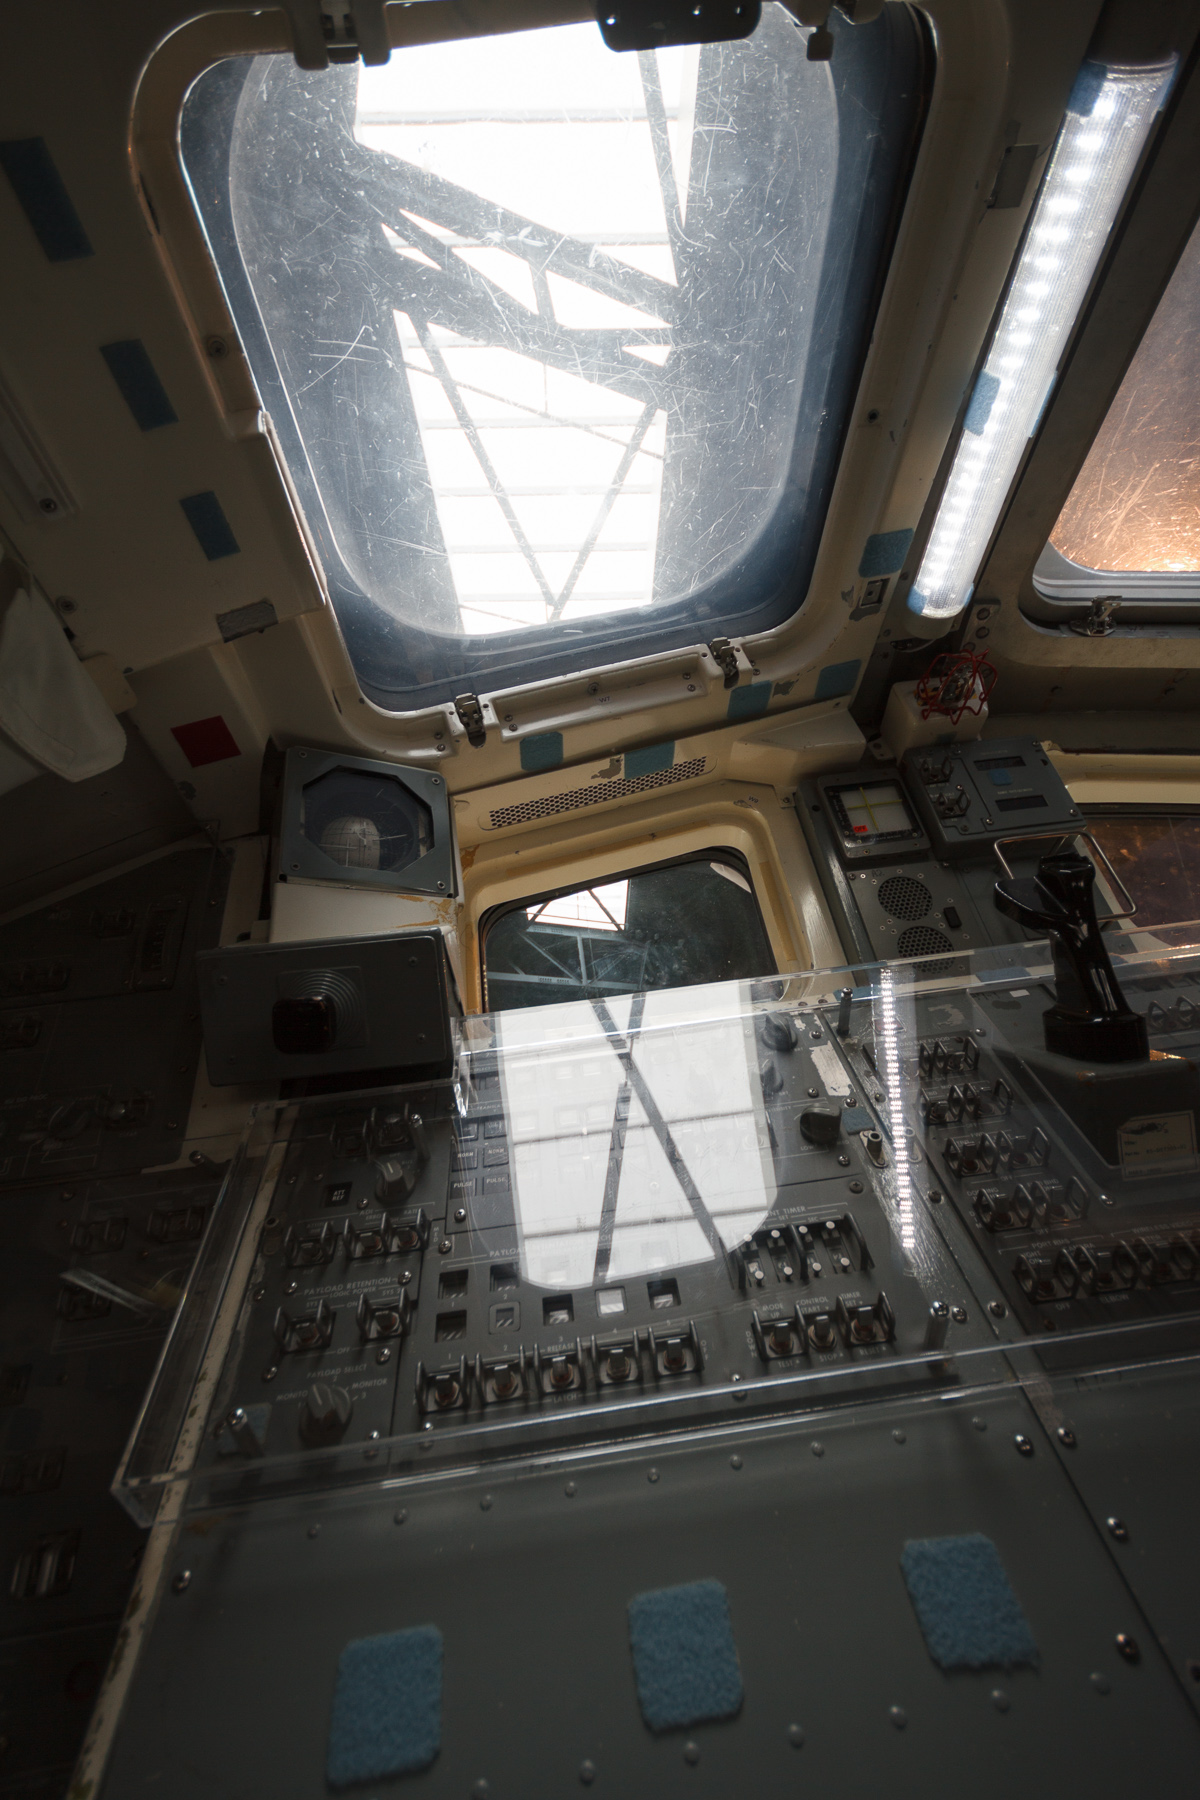 a view inside the rear part of a space station